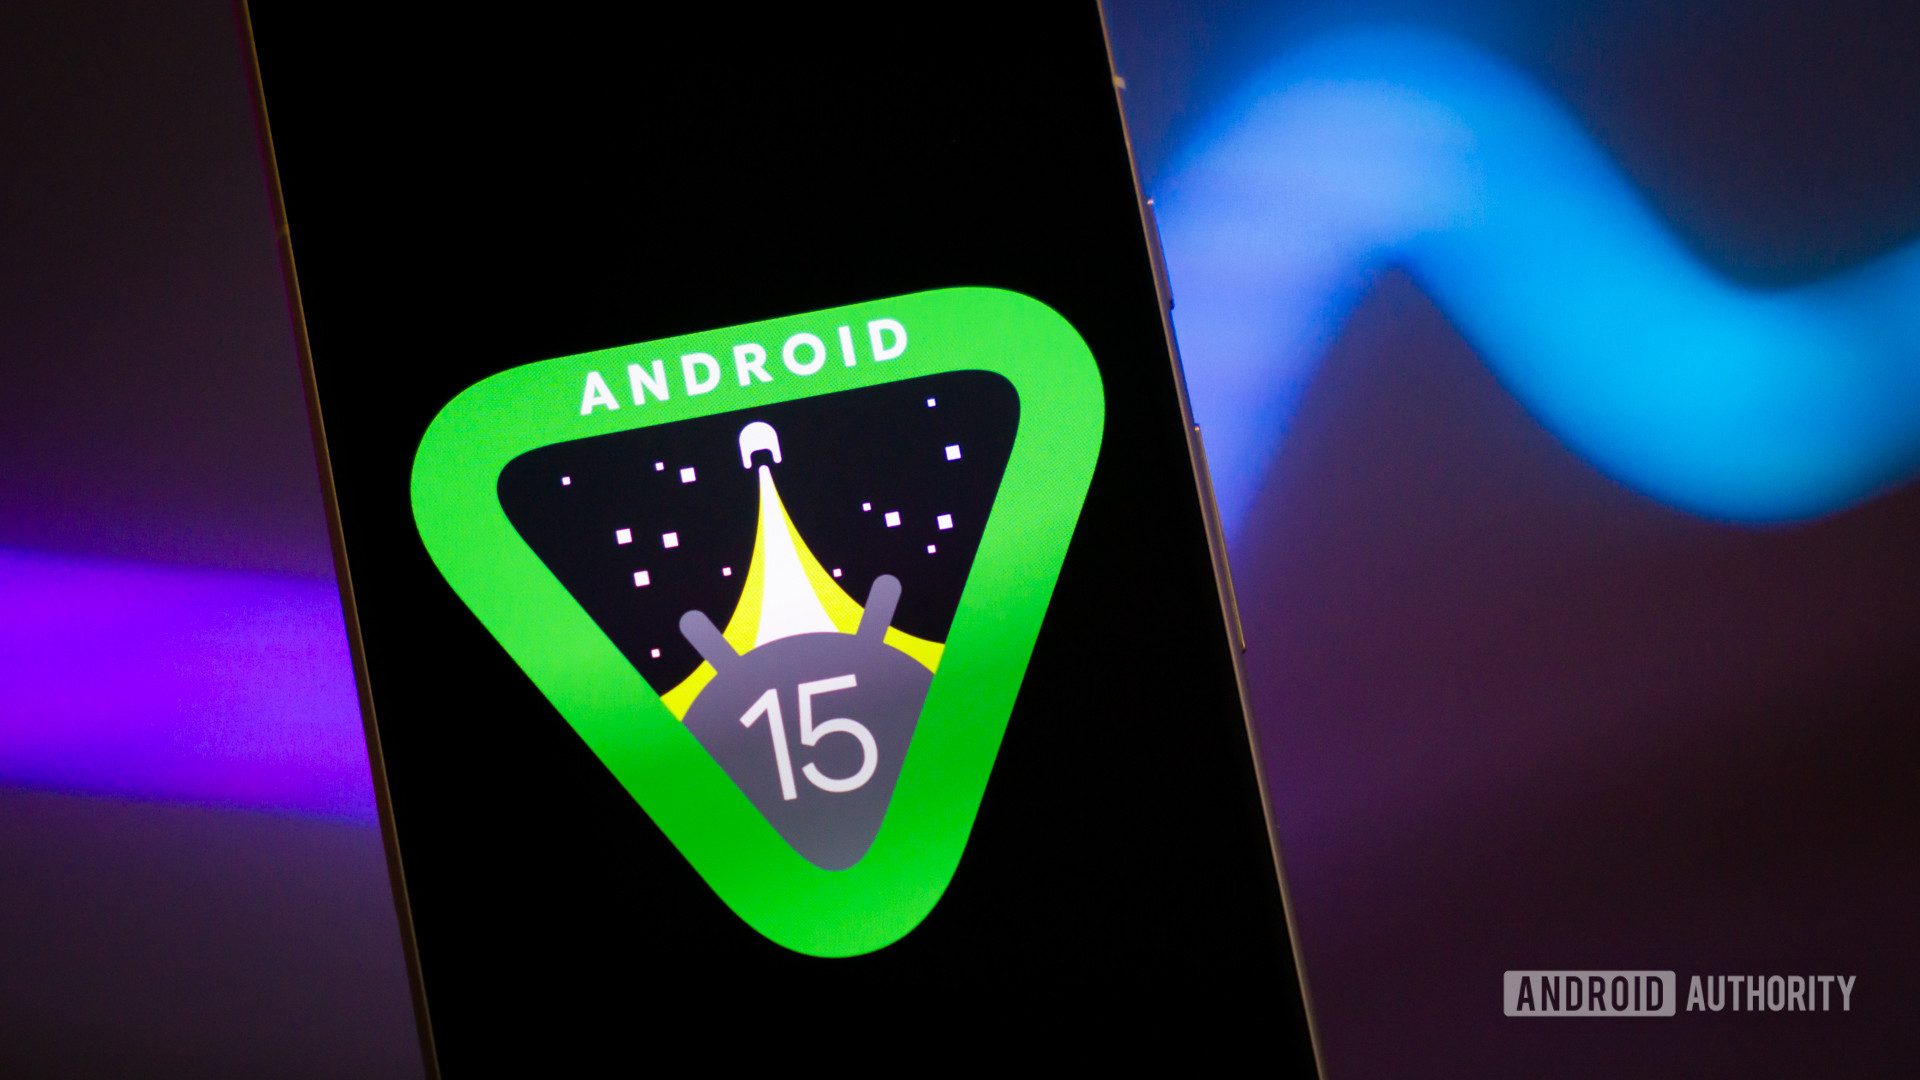 Android 15 logo on smartphone with light strip in background stock photo (17)